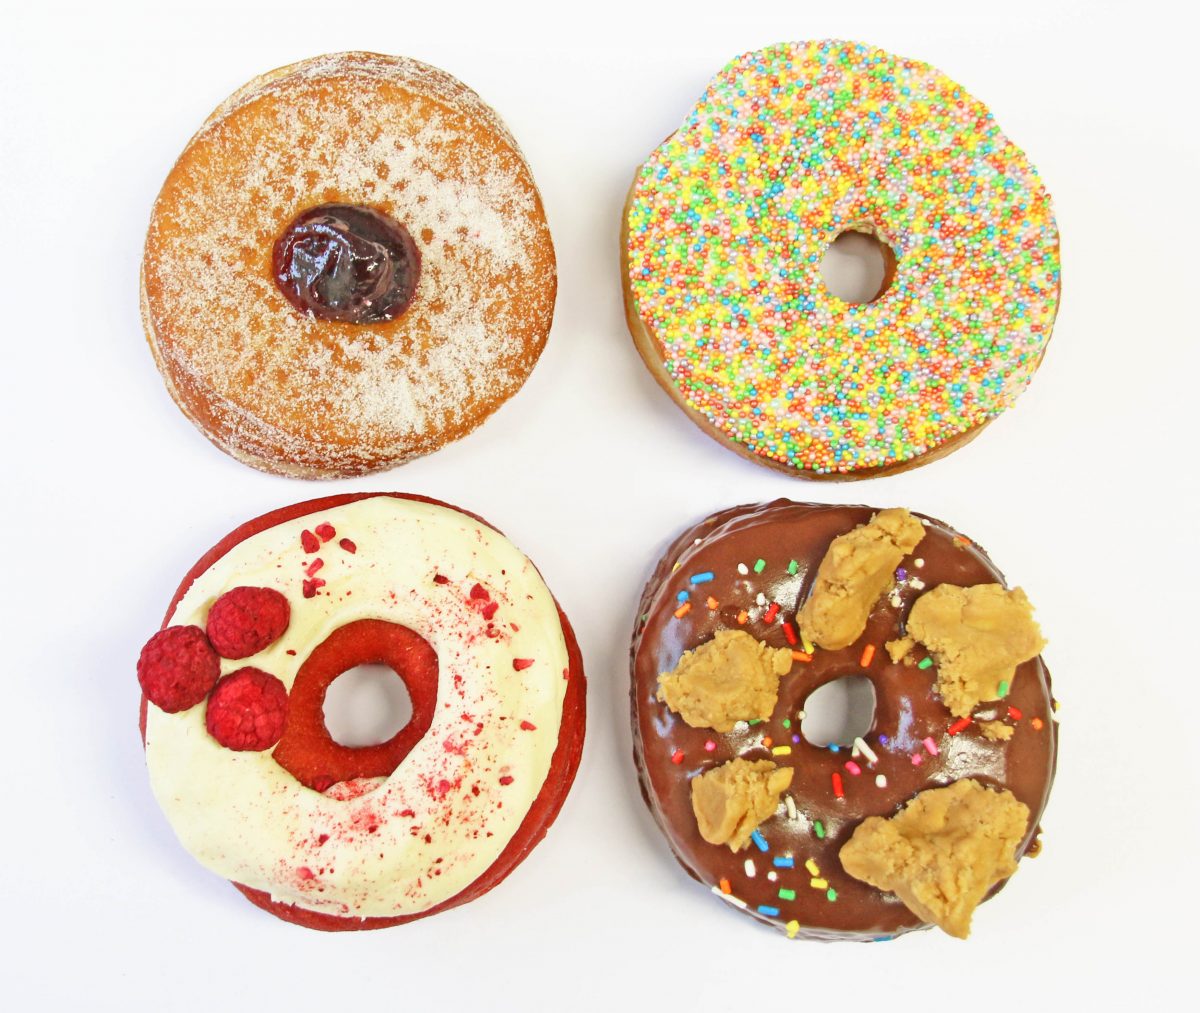 London's hottest new doughnut store launches 4-pack of vegan doughnuts